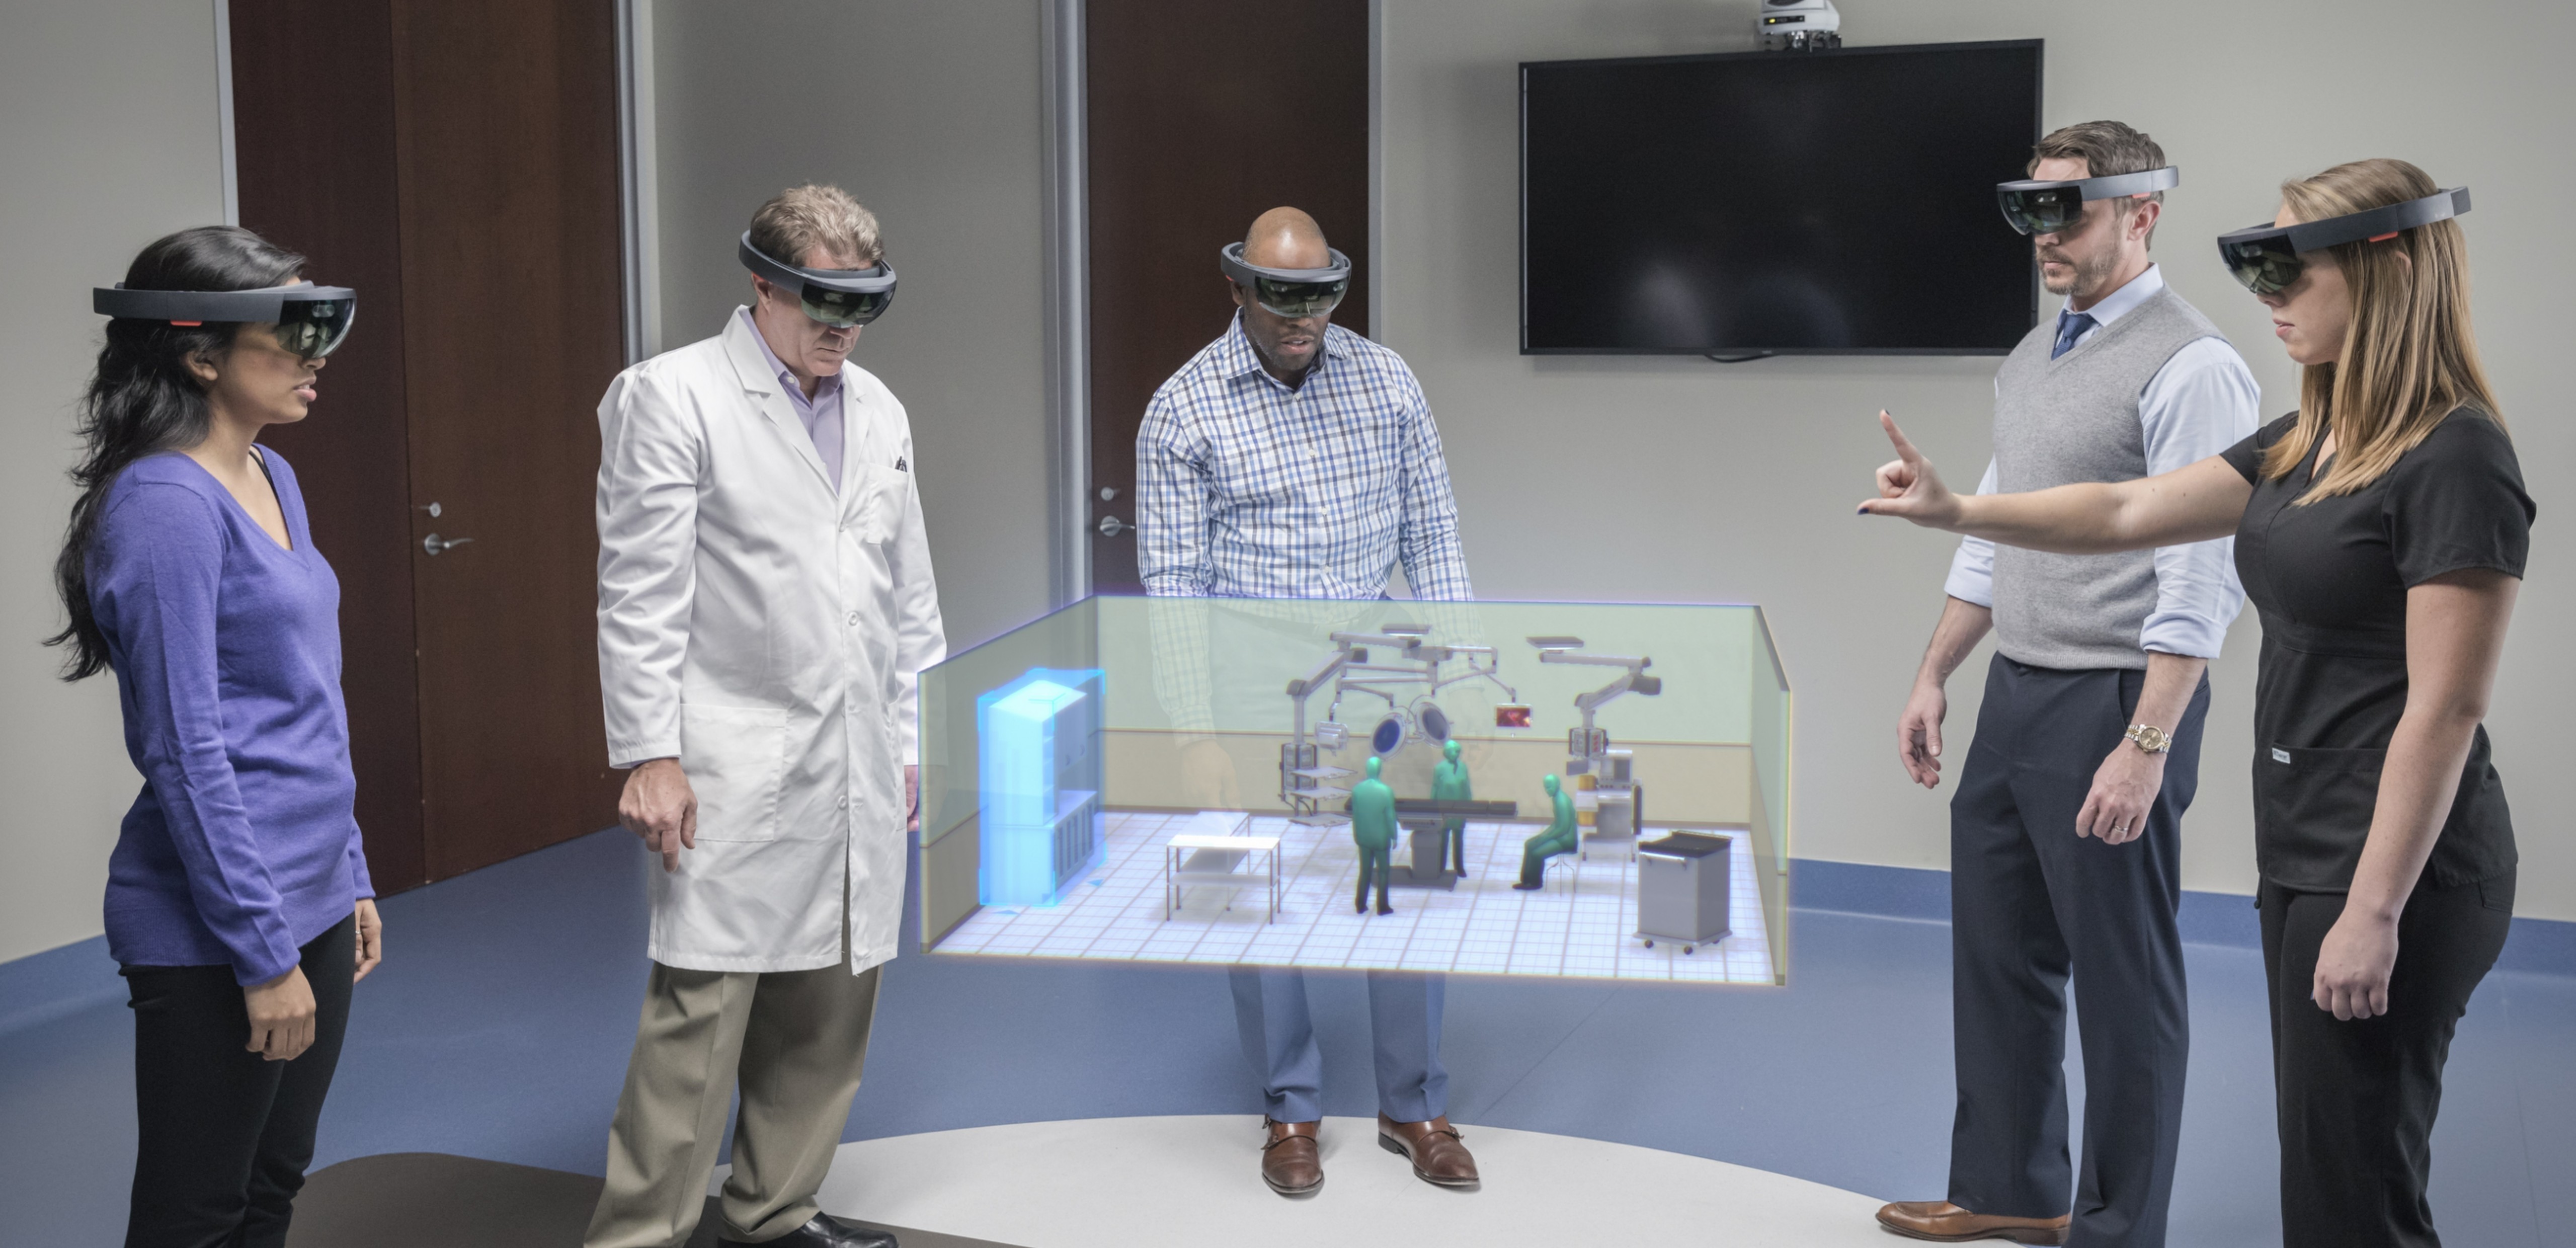 Using HoloLens and Stryker’s new By Design solution, hospital stakeholders are now able to envision the ideal operating room configuration with the power of holograms and the benefit of mixed reality.